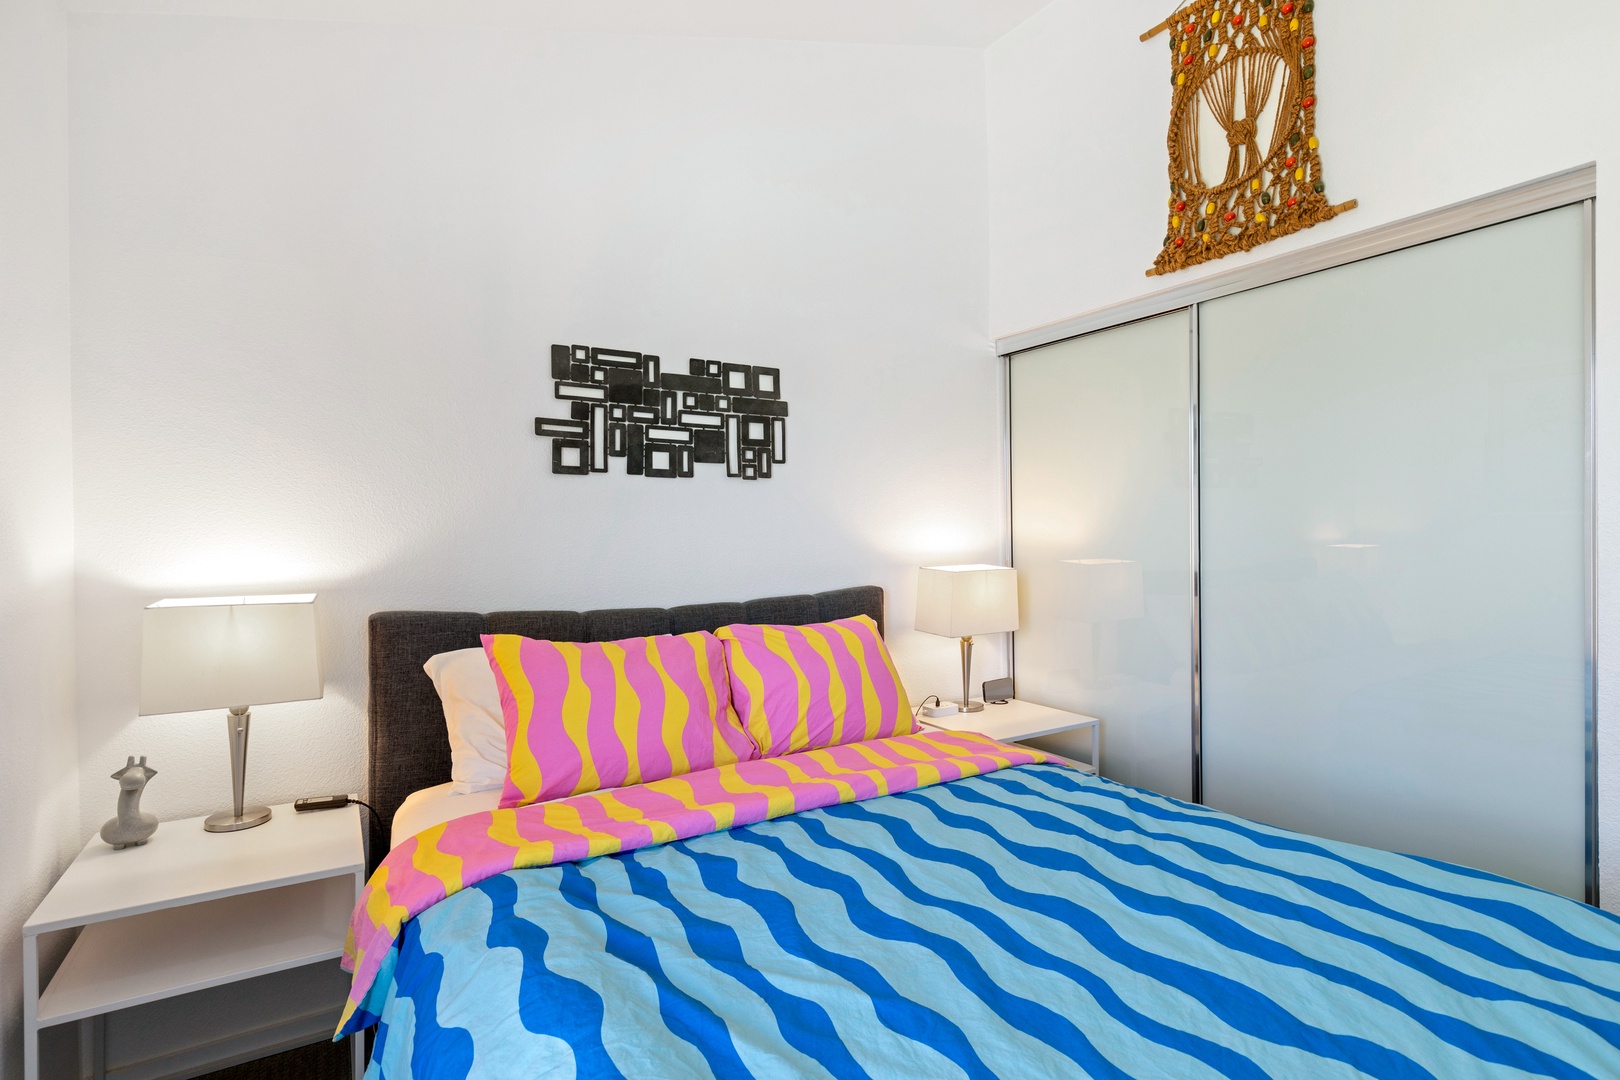 The second bedroom offers a TV & an adjustable queen bed for personalized comfort